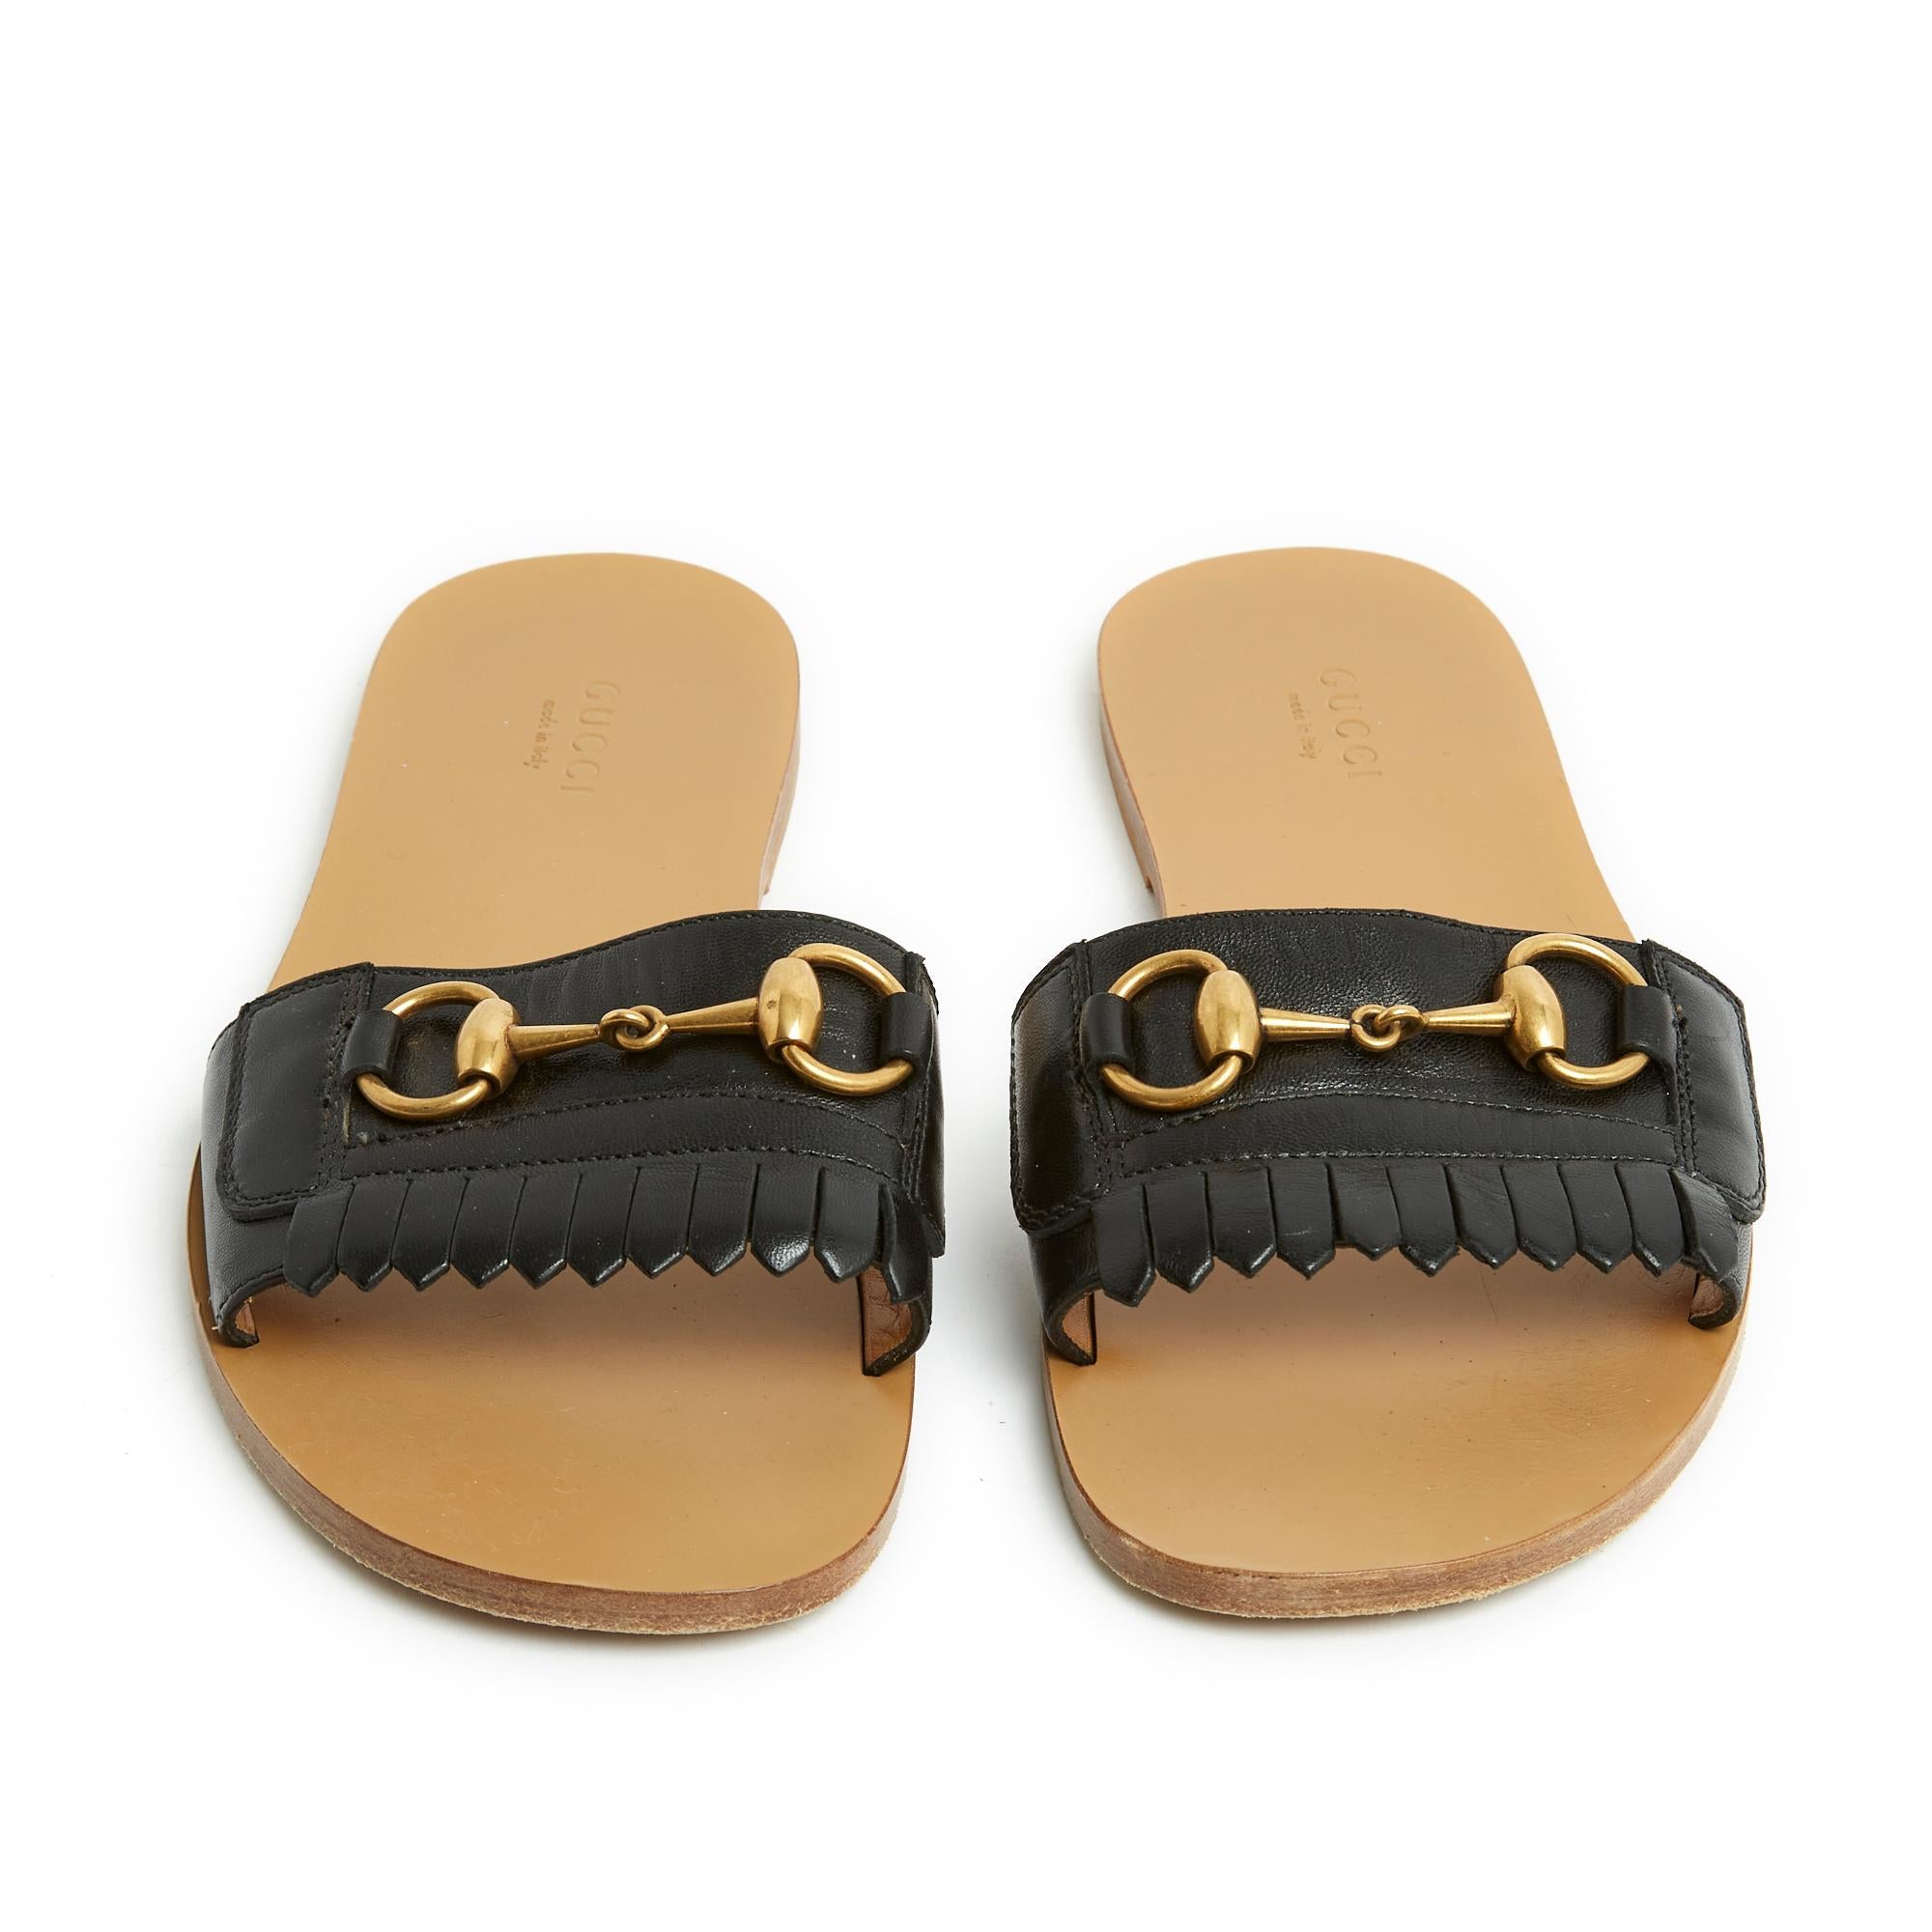 Gucci Horsebit model mules, wide black leather strap with bib and gold metal 